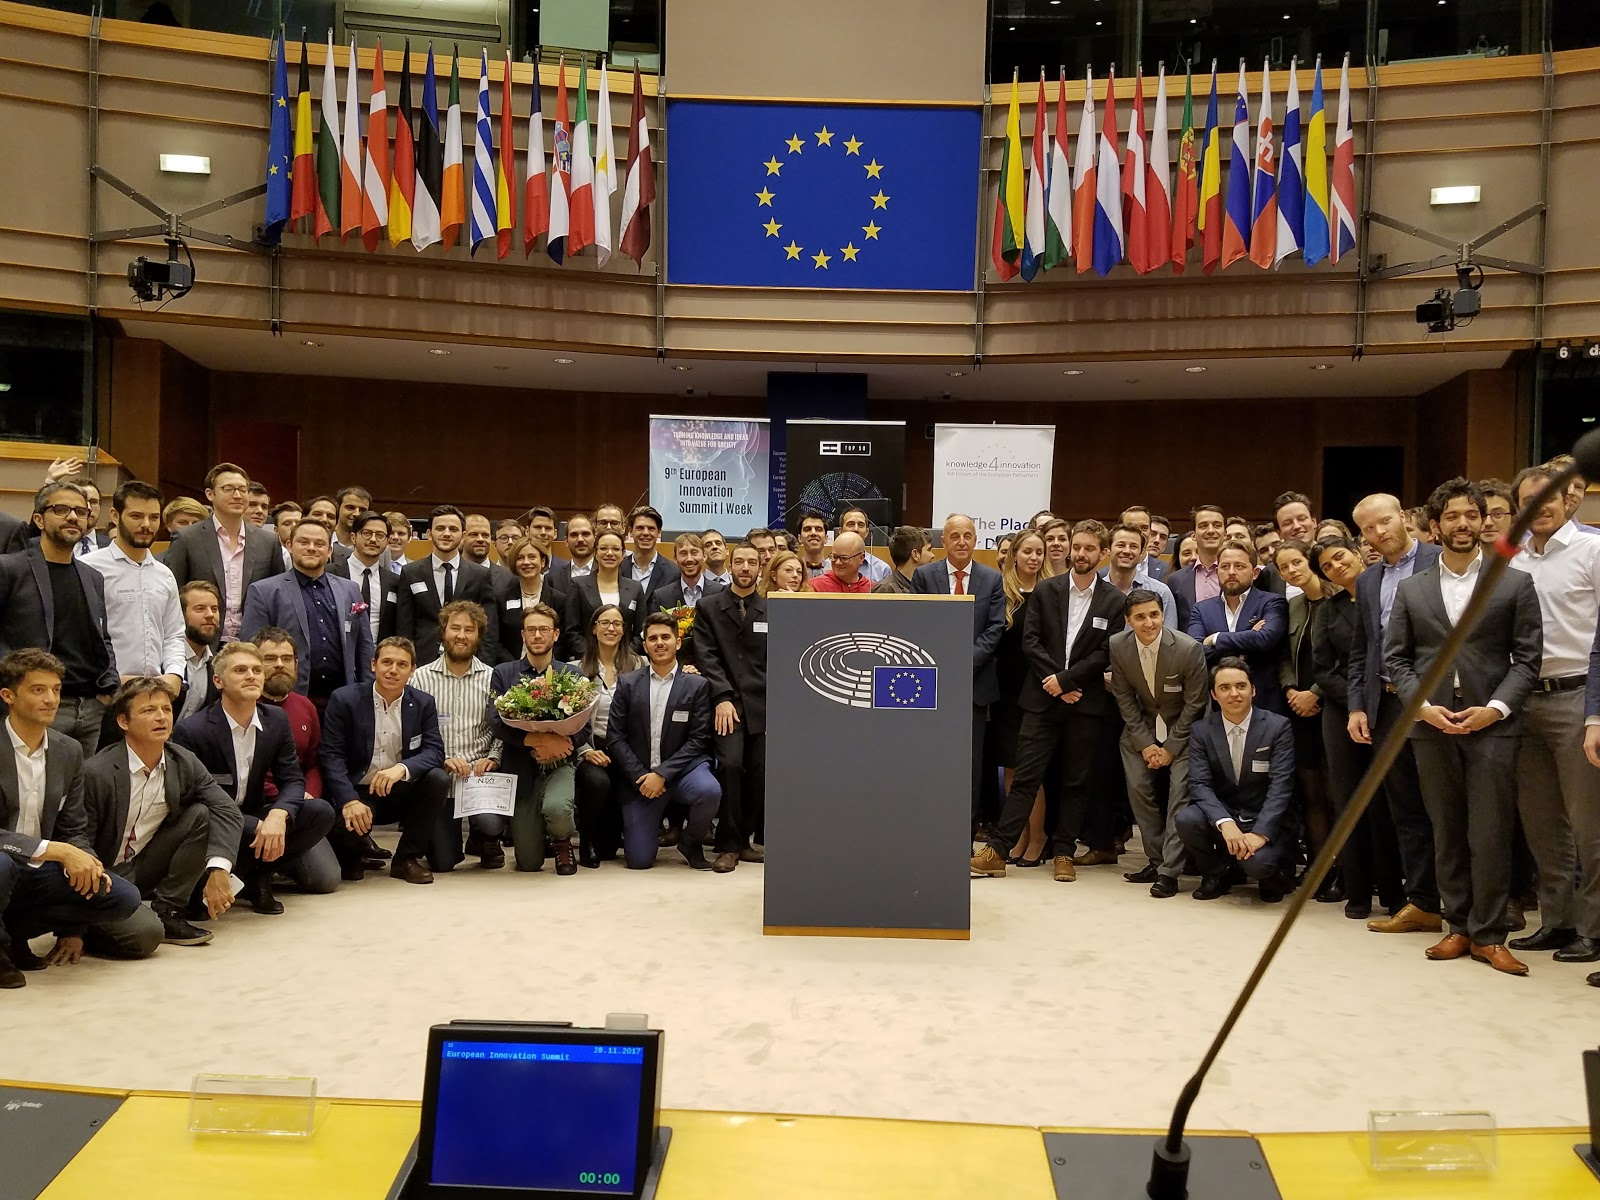 A group of 50 entrepreneurs attending the European Innovation Summit Week event in Brussels.